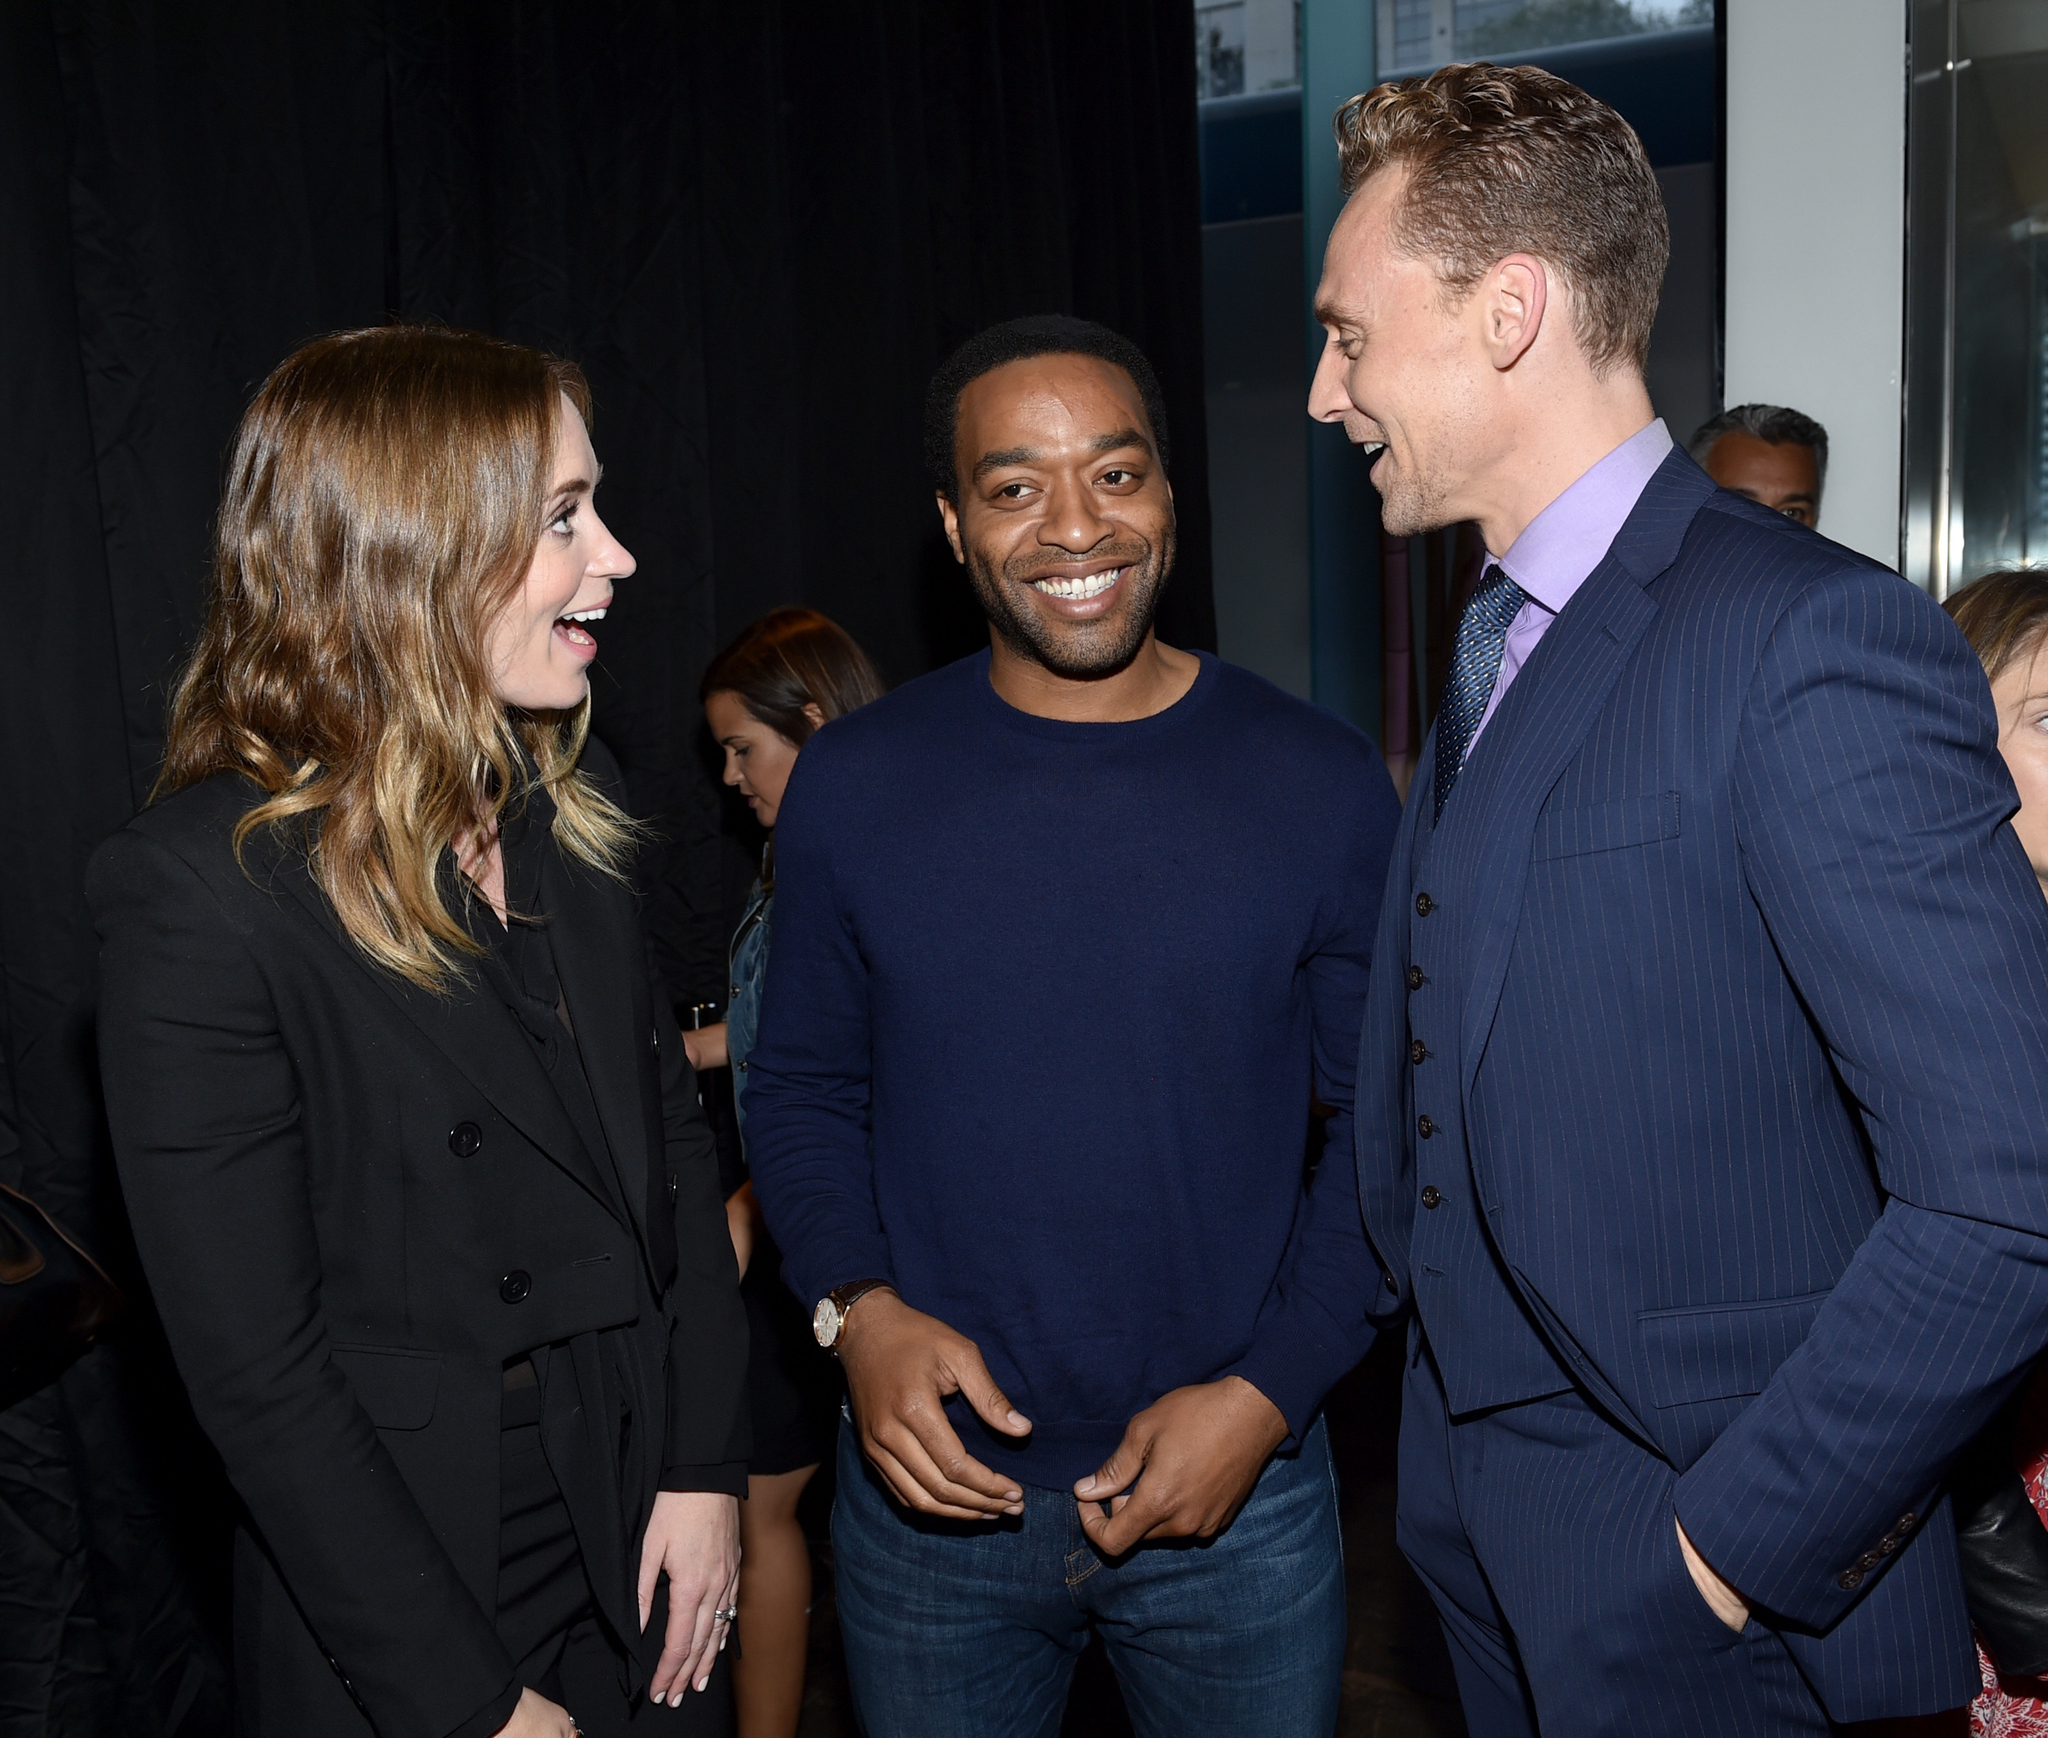 Chiwetel Ejiofor, Tom Hiddleston and Emily Blunt